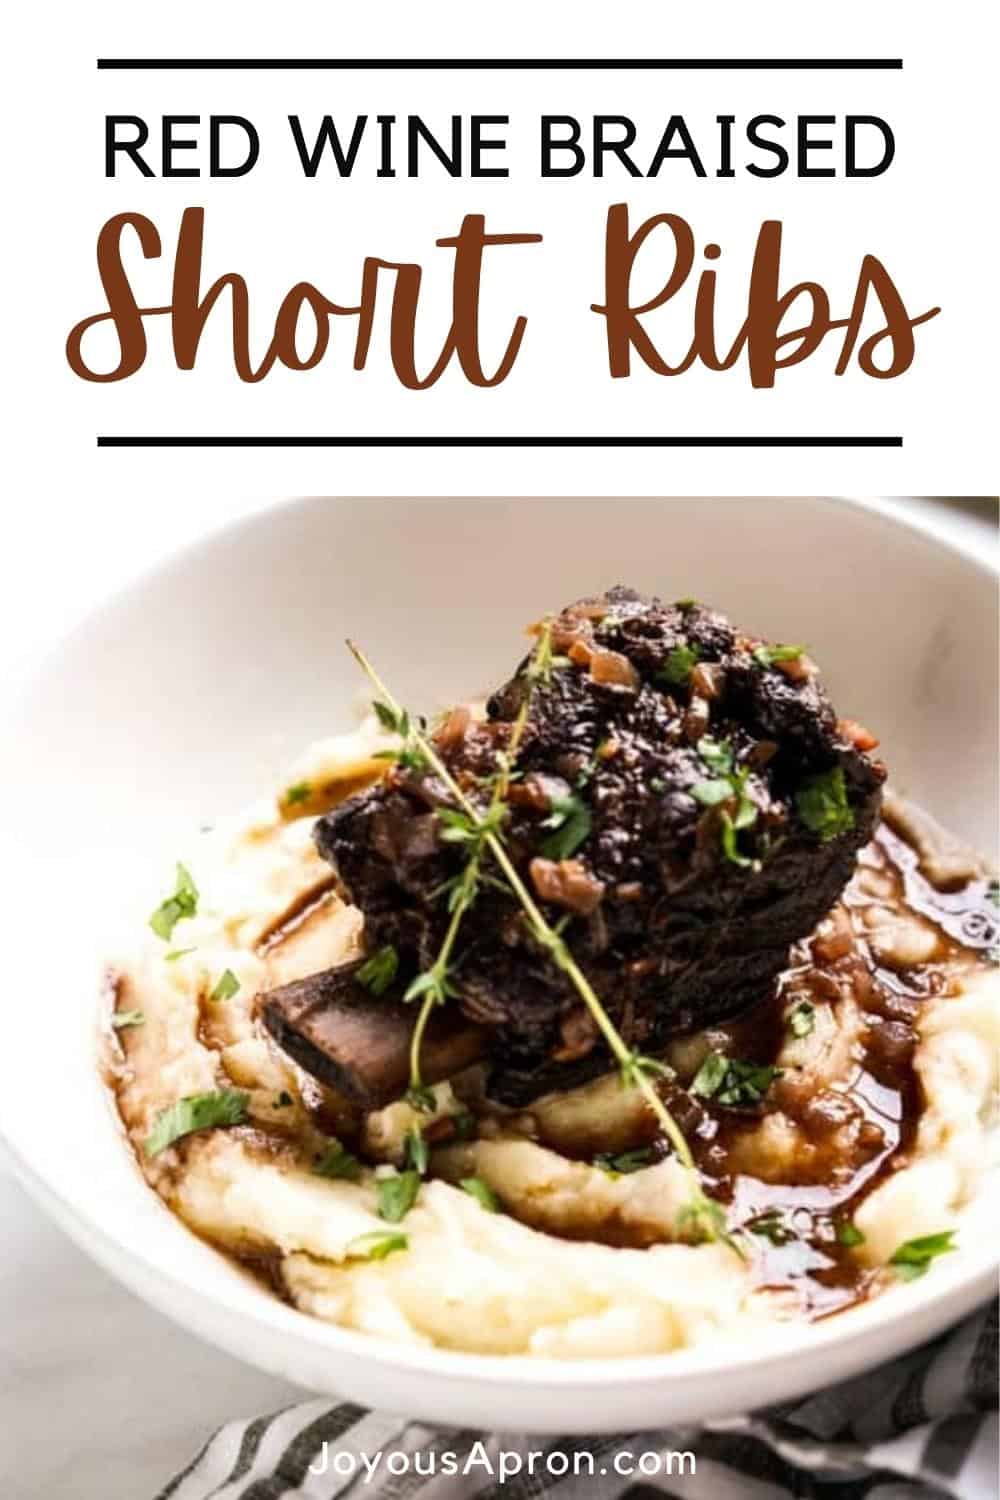 Red Wine Braised Short Ribs - Tender, fall-apart braised beef short ribs cooked in the Dutch Oven is an elegant and delicious meat main dish that is easy and delicious. Flavored with red wine and fresh herbs, it's perfect for holidays, special occasions and more. via @joyousapron